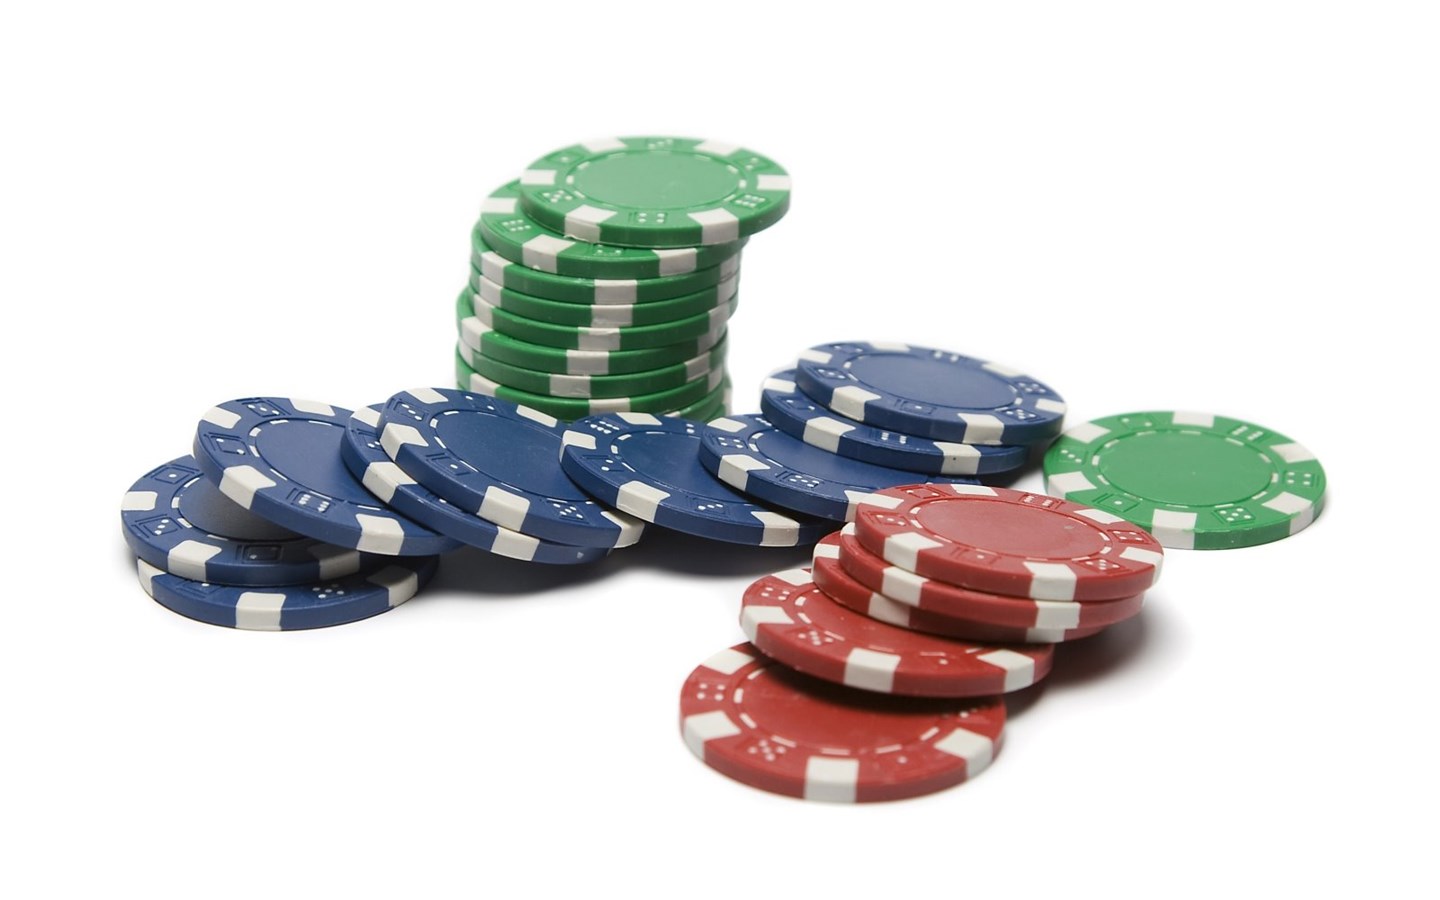 What Does Folding Mean In Poker